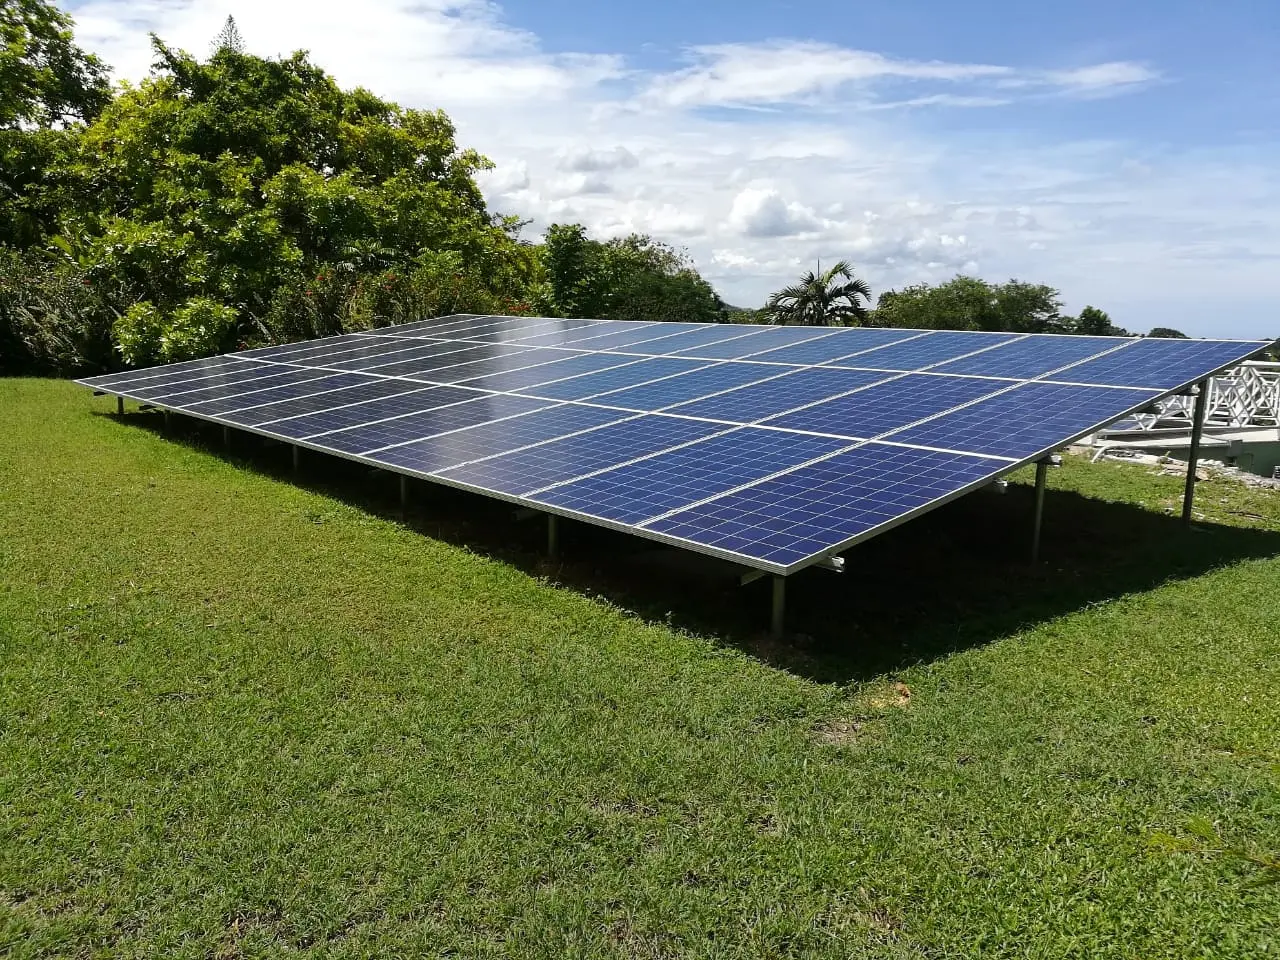 benefits of solar energy in jamaica - What are the sources of energy in Jamaica